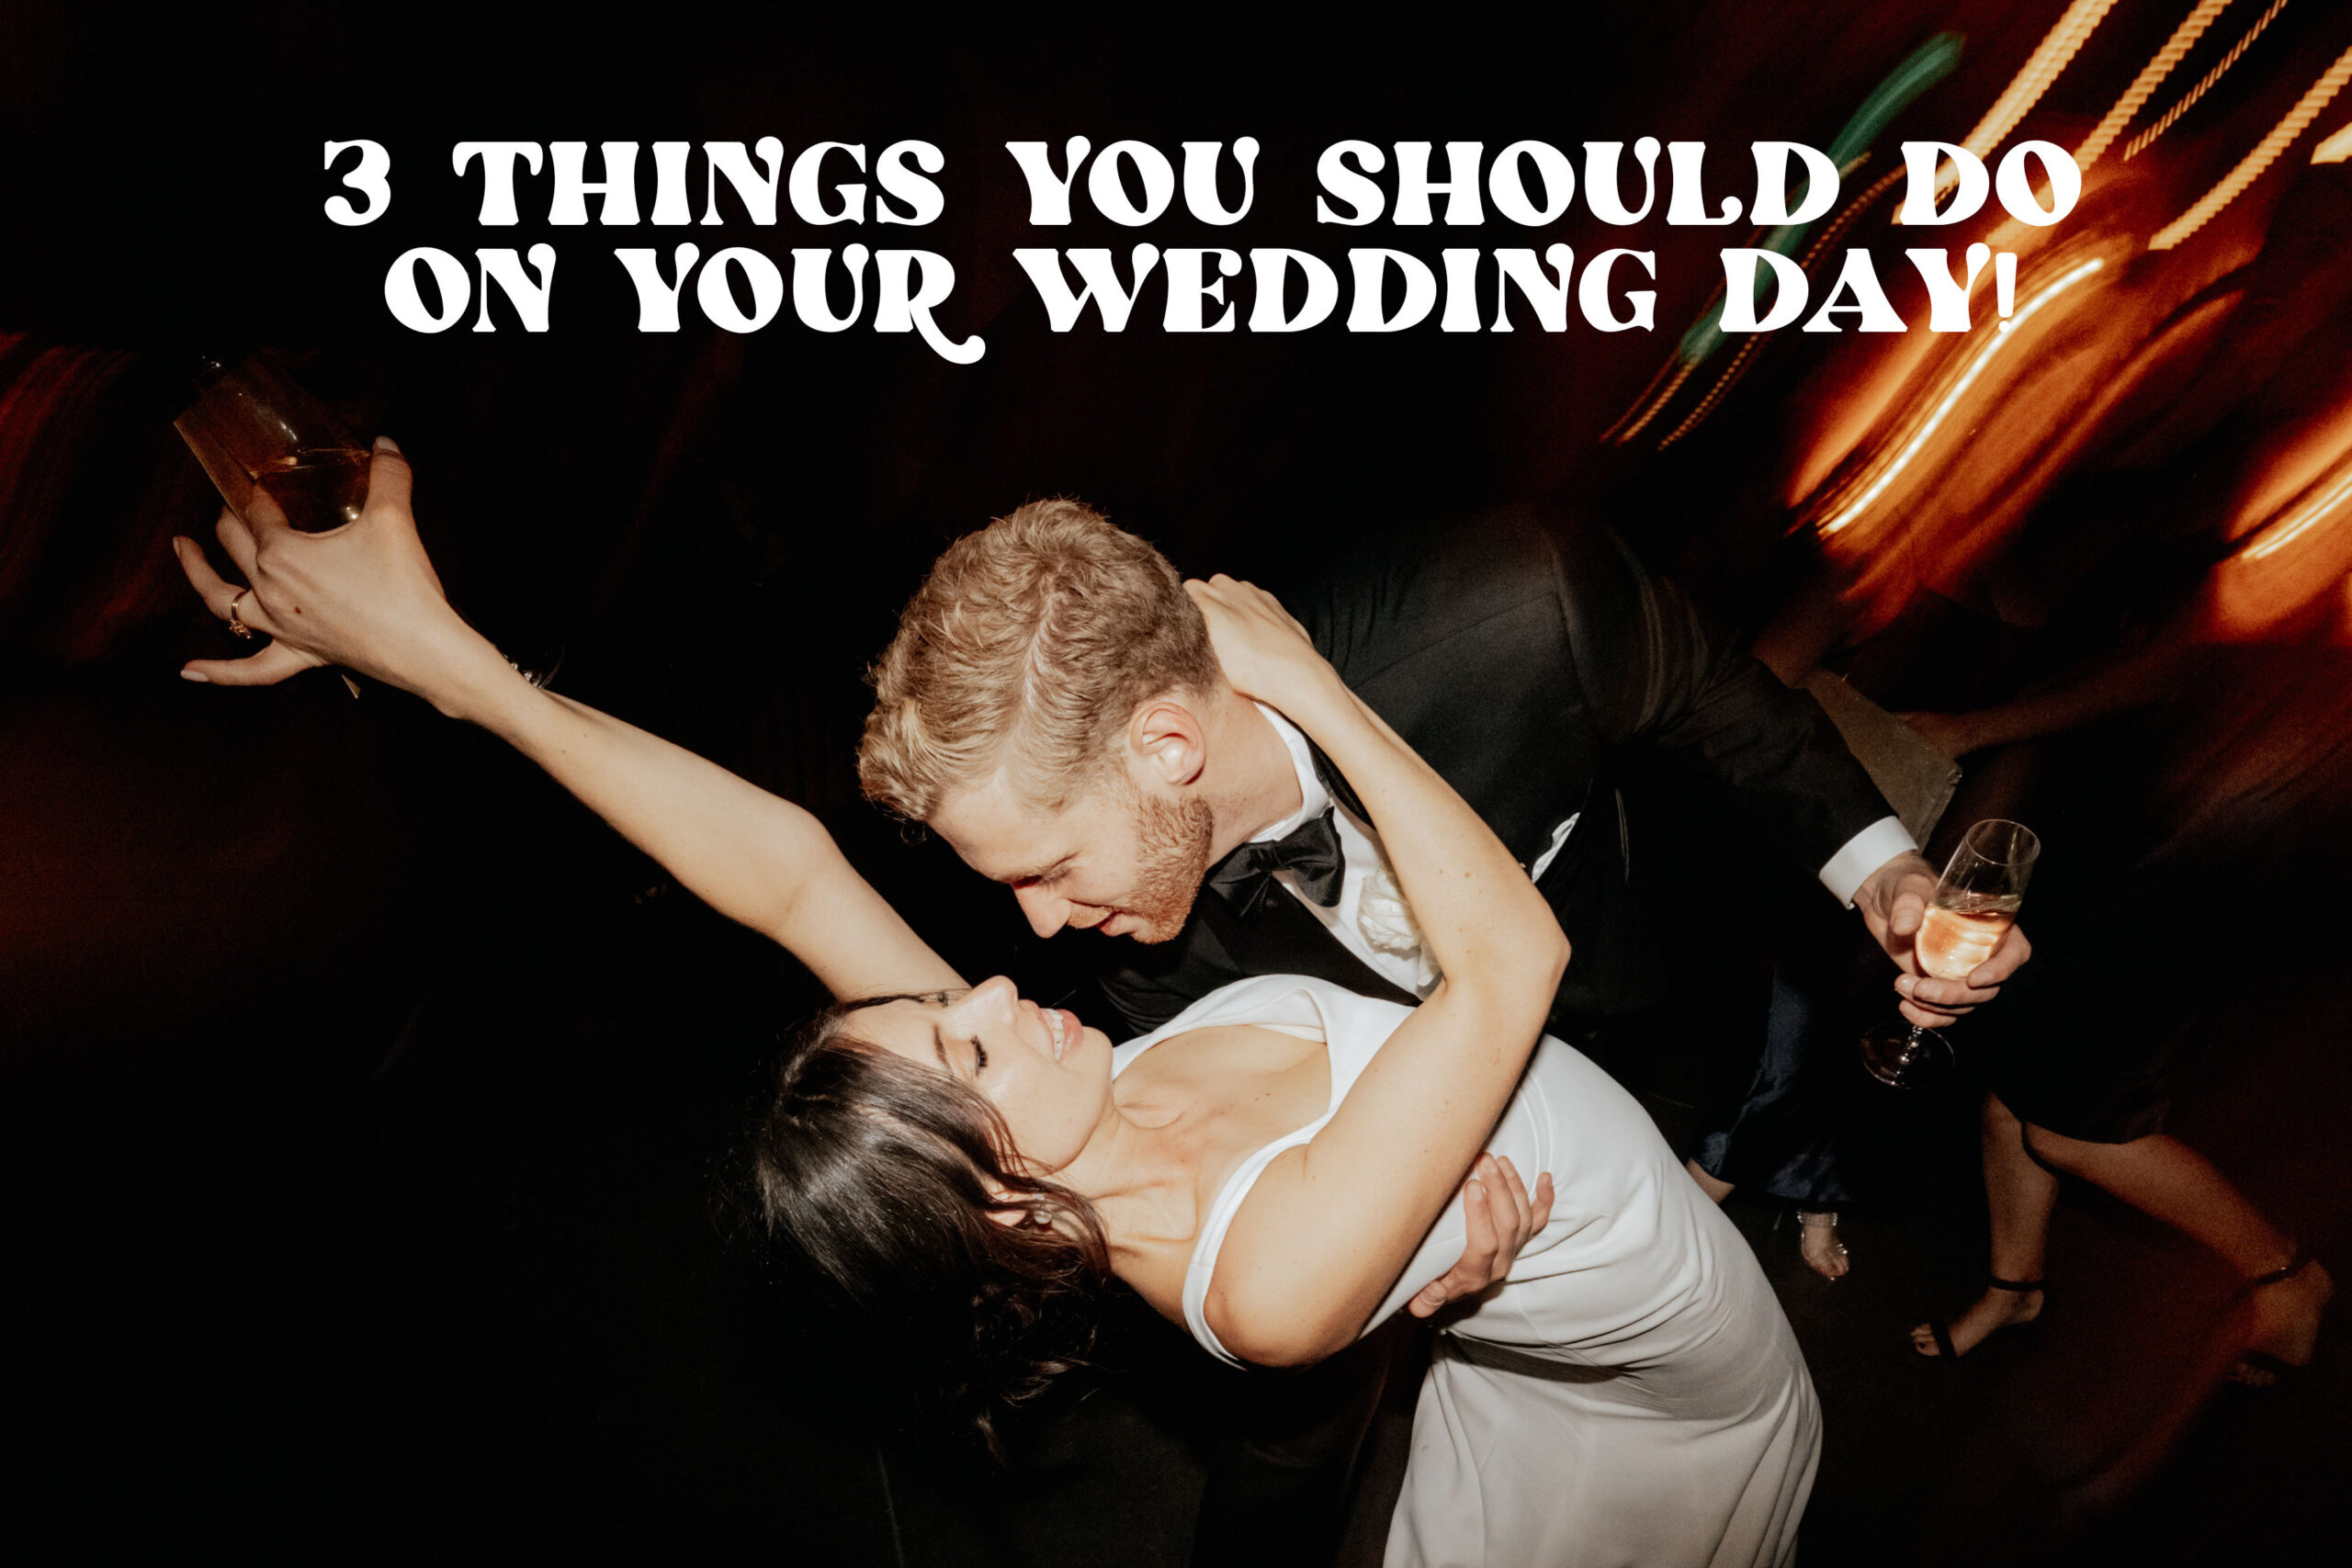 Have fun on your wedding day!